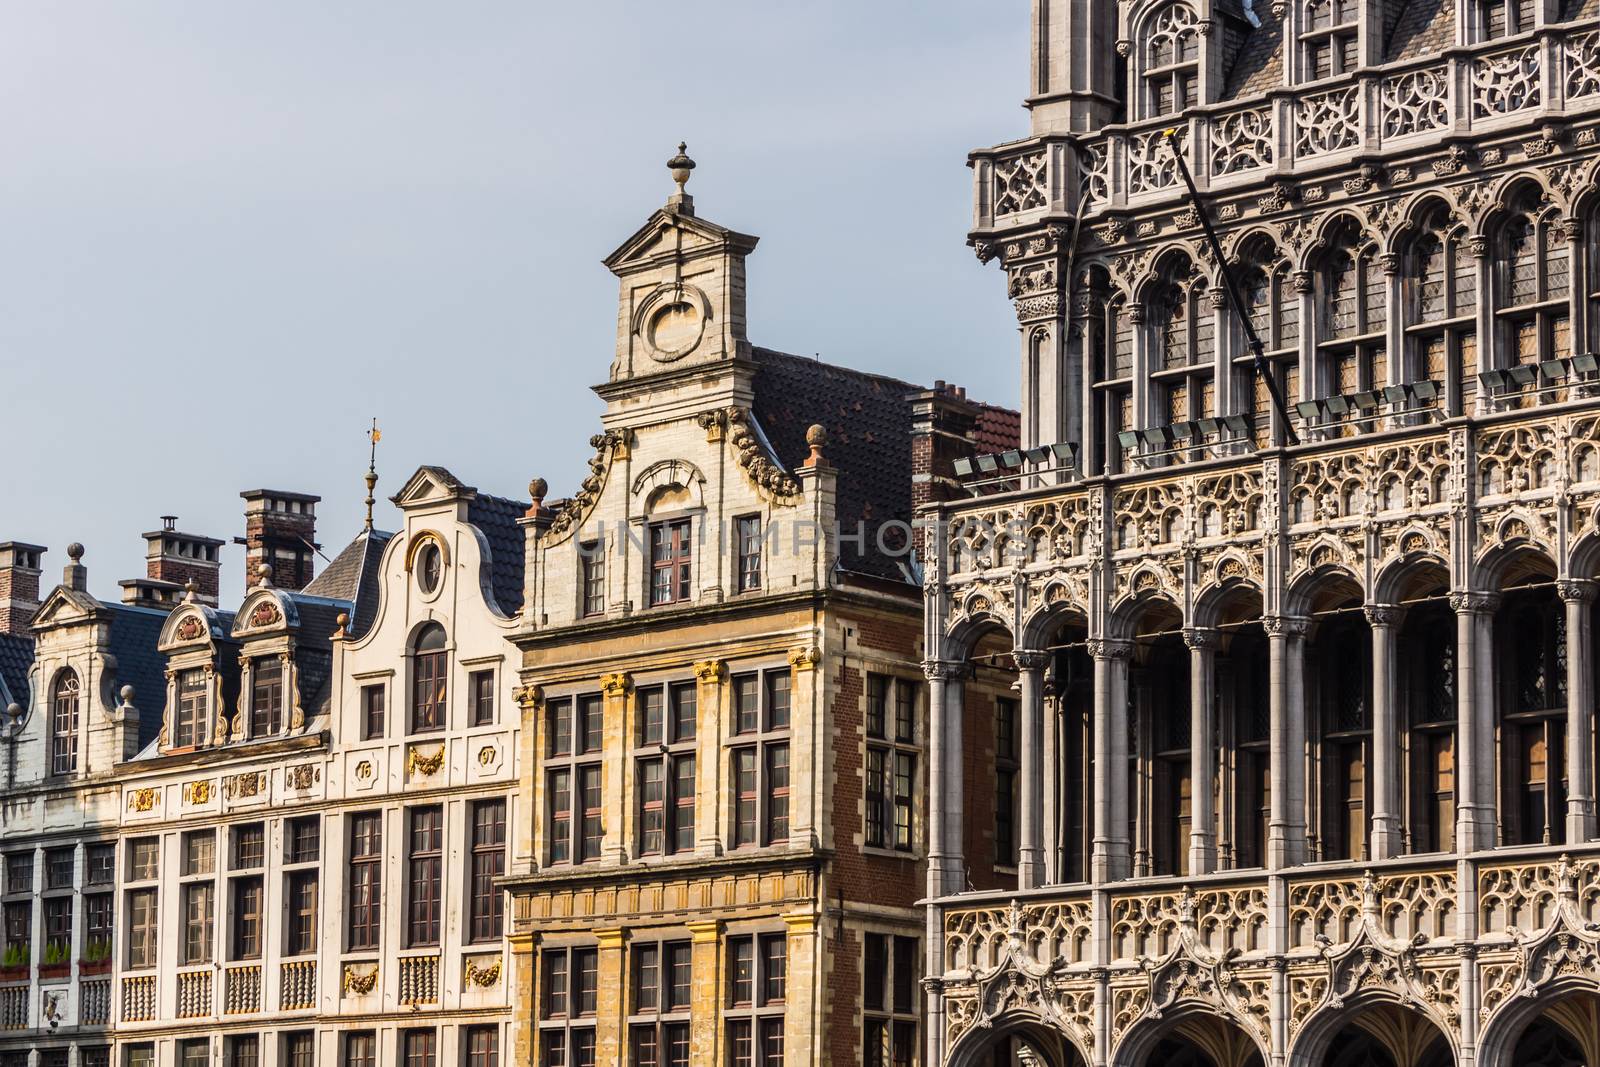 Fragment of King's House and ancient tenements on the Grand Place in Brussels, Belgium. The Grand Place is UNESCO World Heritage Site.